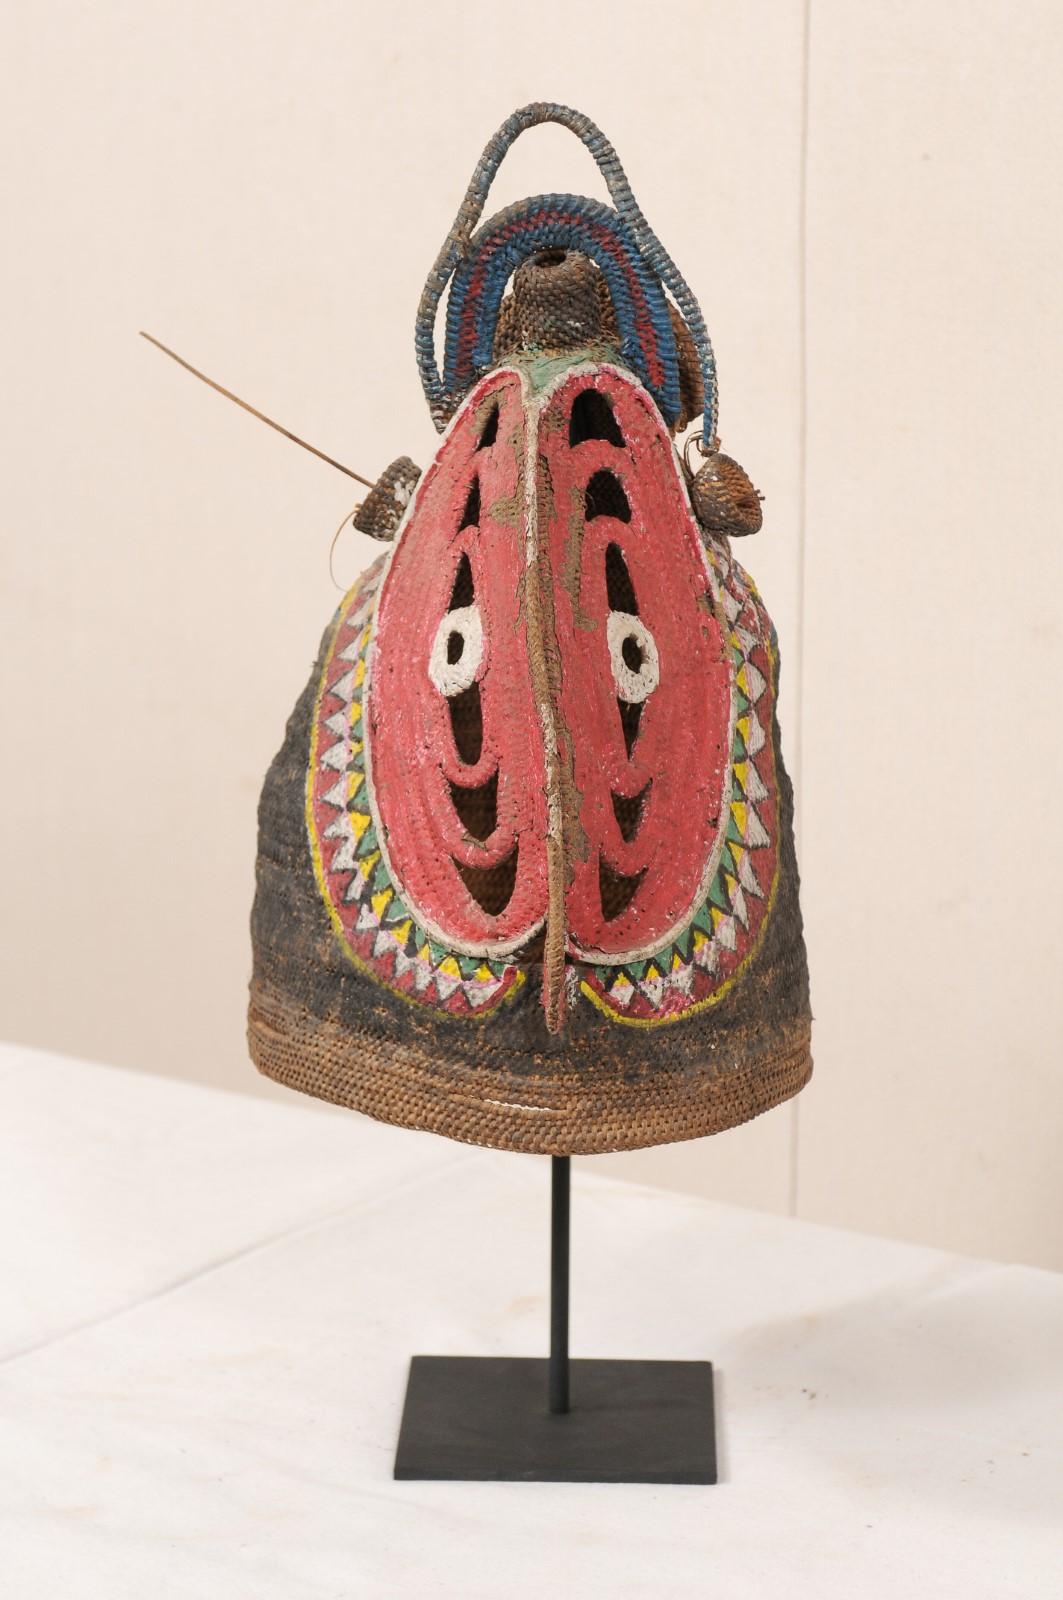 A Papua New Guinea yam festival mask, in the image of a horn-billed bird with vibrant coloring, from the mid-20th century. This vintage ceremonial mask, also referred to as a baba mask, originates from the Abelam people, along the East Sepik River